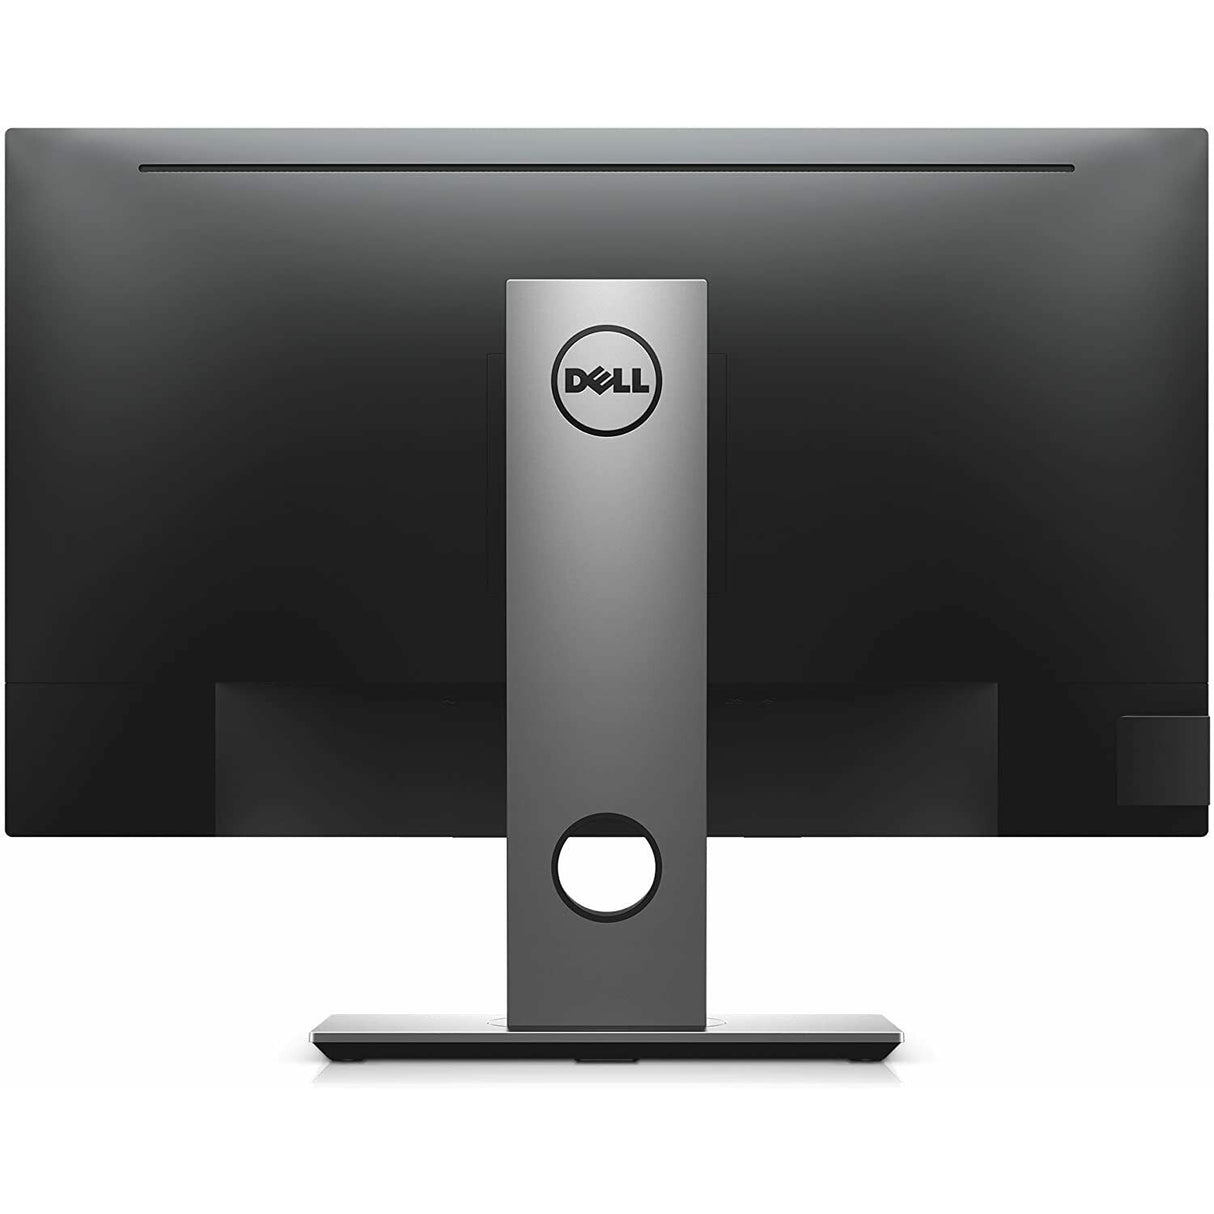 Dell P2417H 24 inch FHD 1080p Monitor - Refurbished Excellent